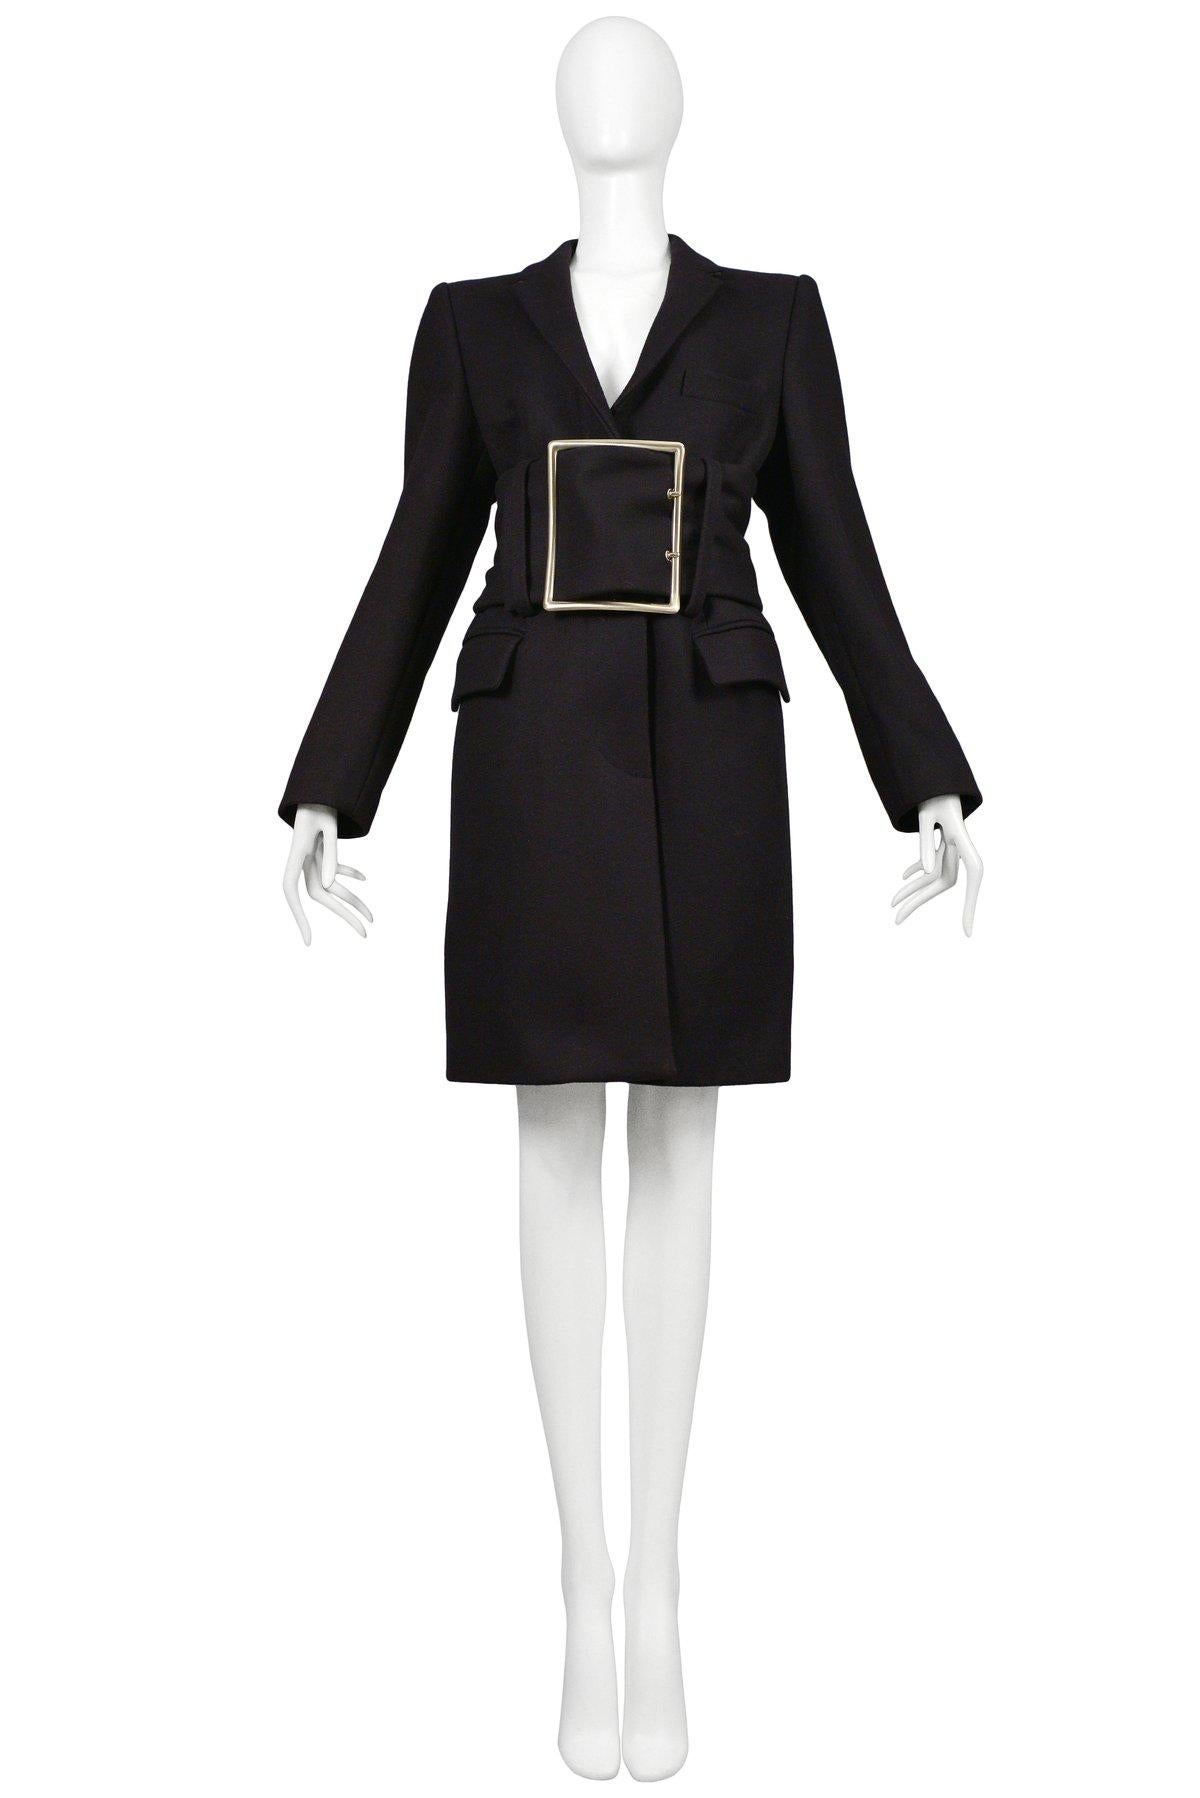 Resurrection Vintage is pleased to offer a vintage Maison Martin Margiela dark navy wool coat featuring an oversized attached silver-tone belt buckle and adjustable belt, side-front pockets, and Circa Autumn / Winter 1996.

Maison Martin